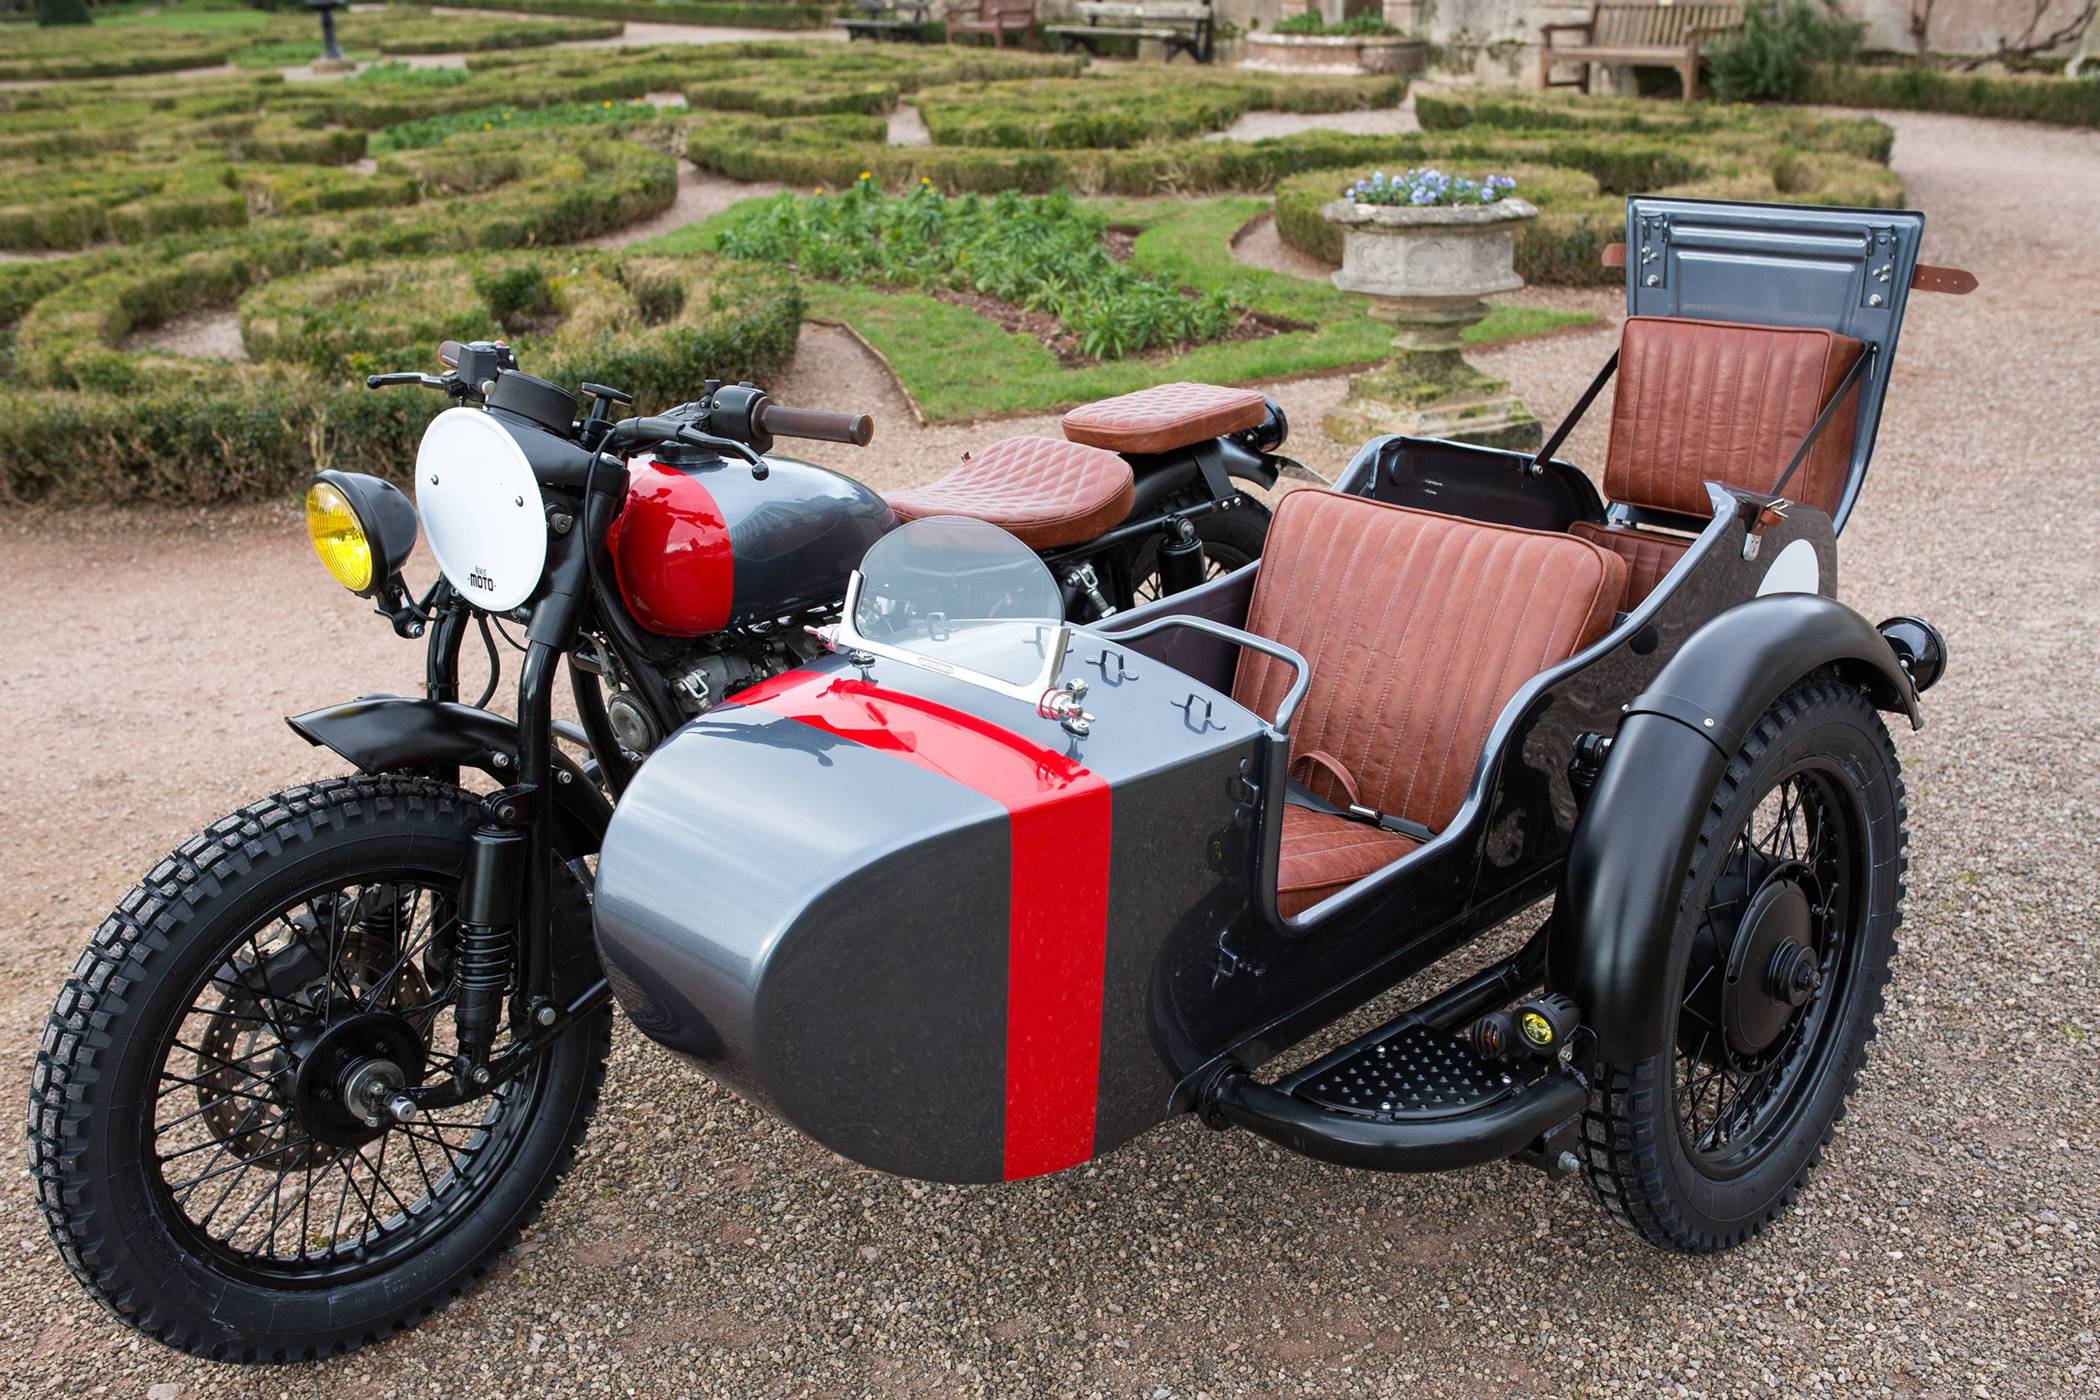 Custom Ural Sidecar Has Room for Four and We Love It - autoevolution